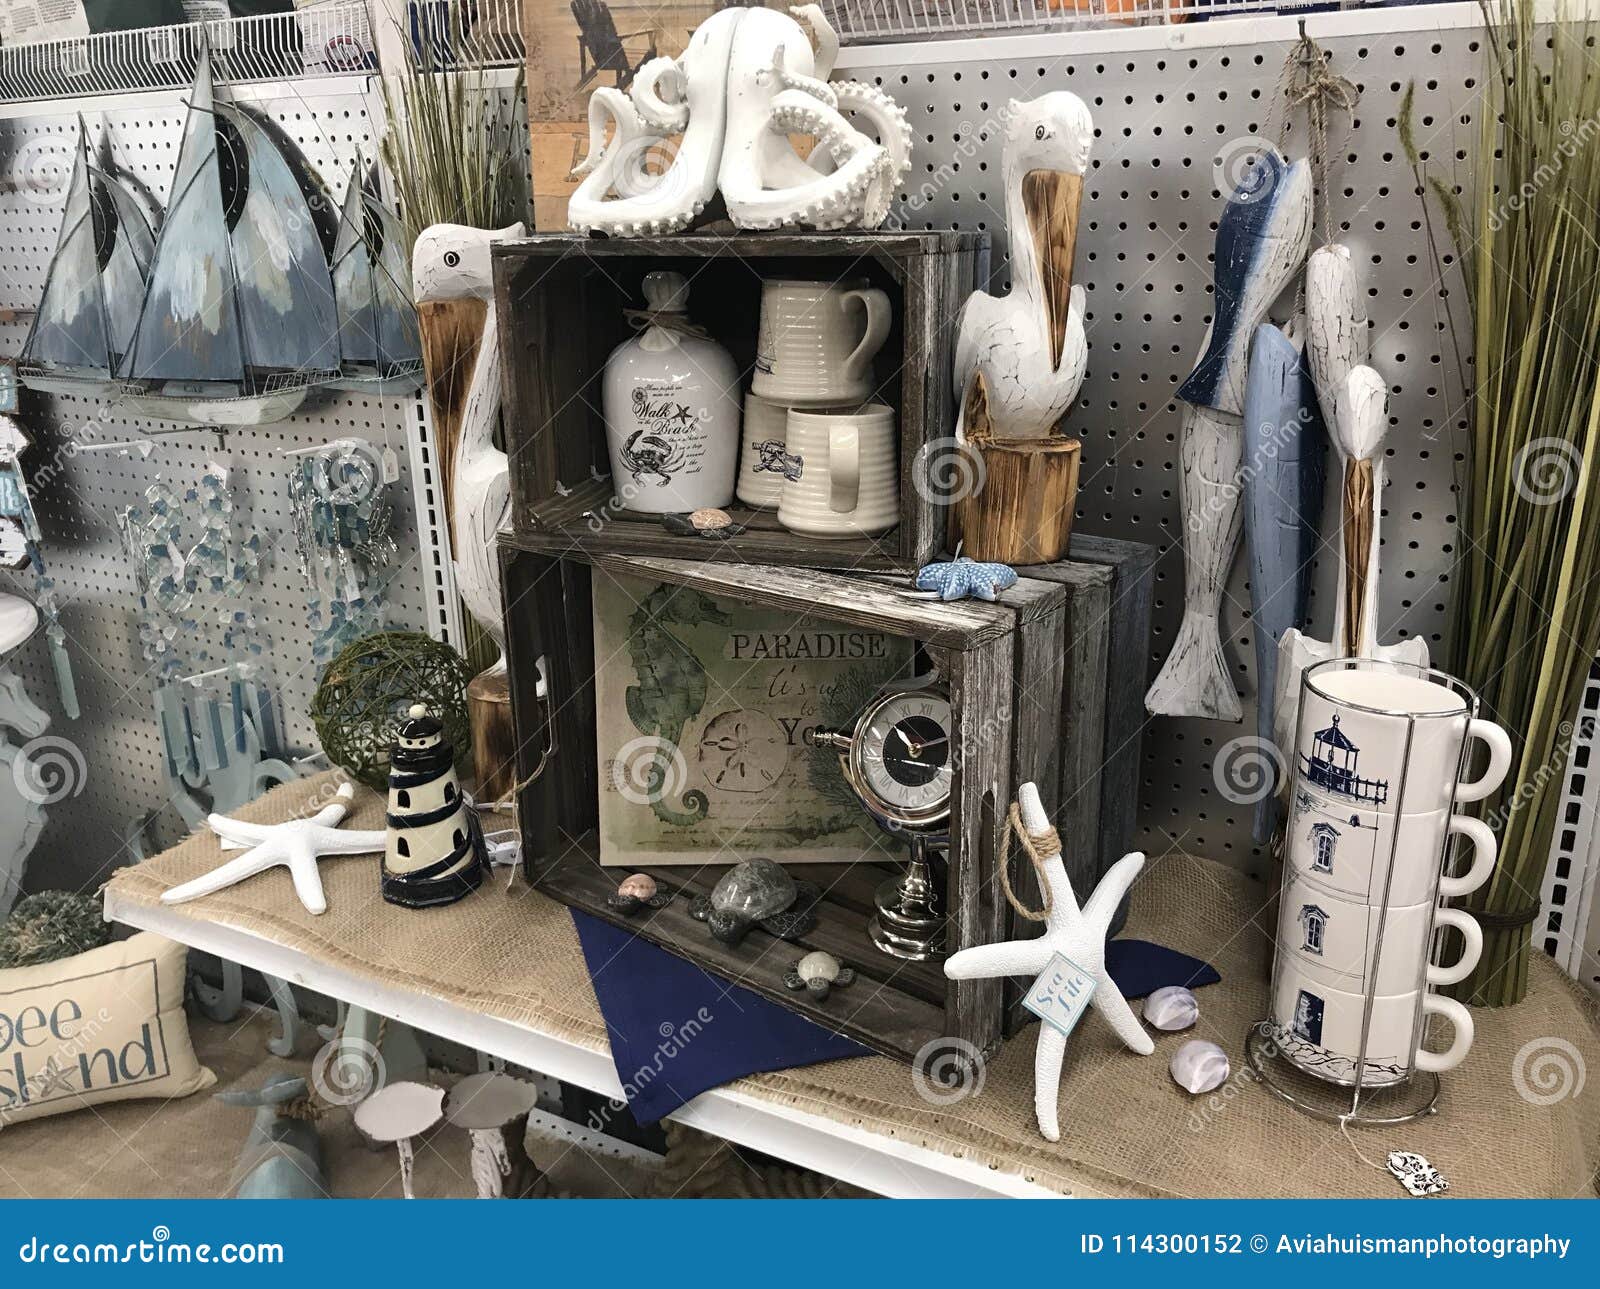 https://thumbs.dreamstime.com/z/nautical-decorations-shelf-decor-store-items-include-starfish-pelicans-octopus-fish-sailboats-other-coastal-themed-114300152.jpg